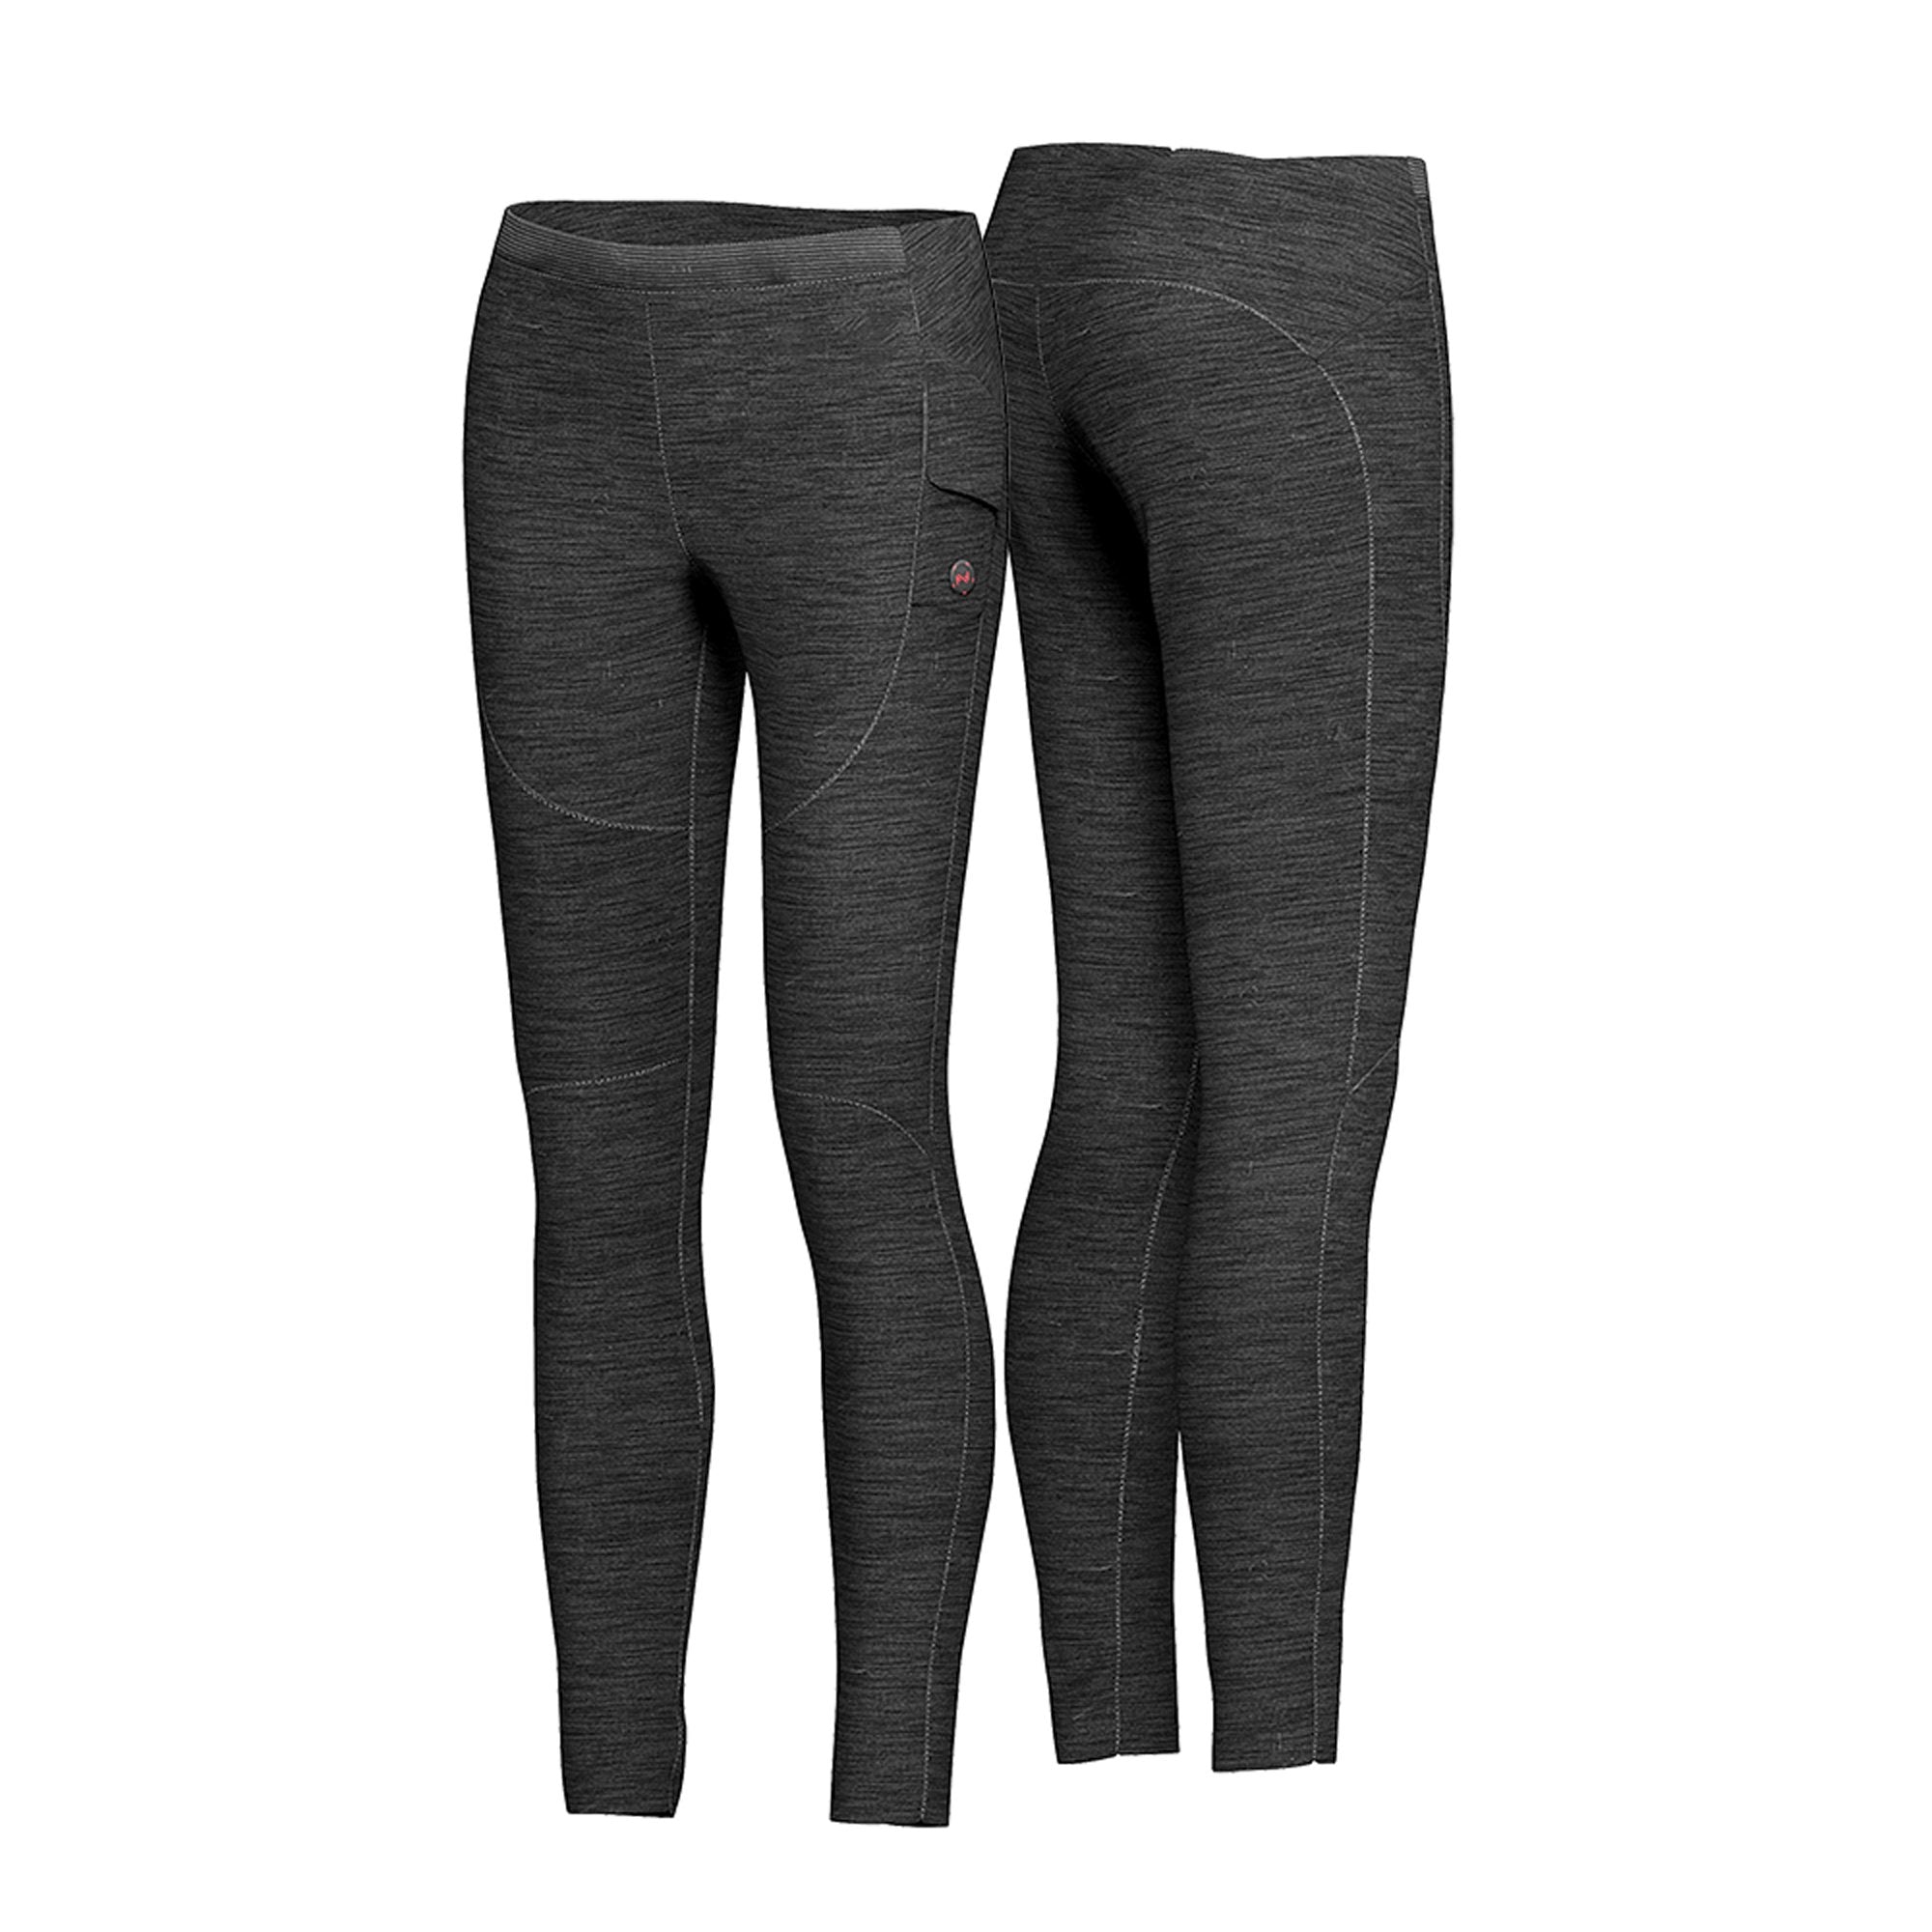 Lqqsd Heated Pants For Women Warming Trousers Thermal Underwear